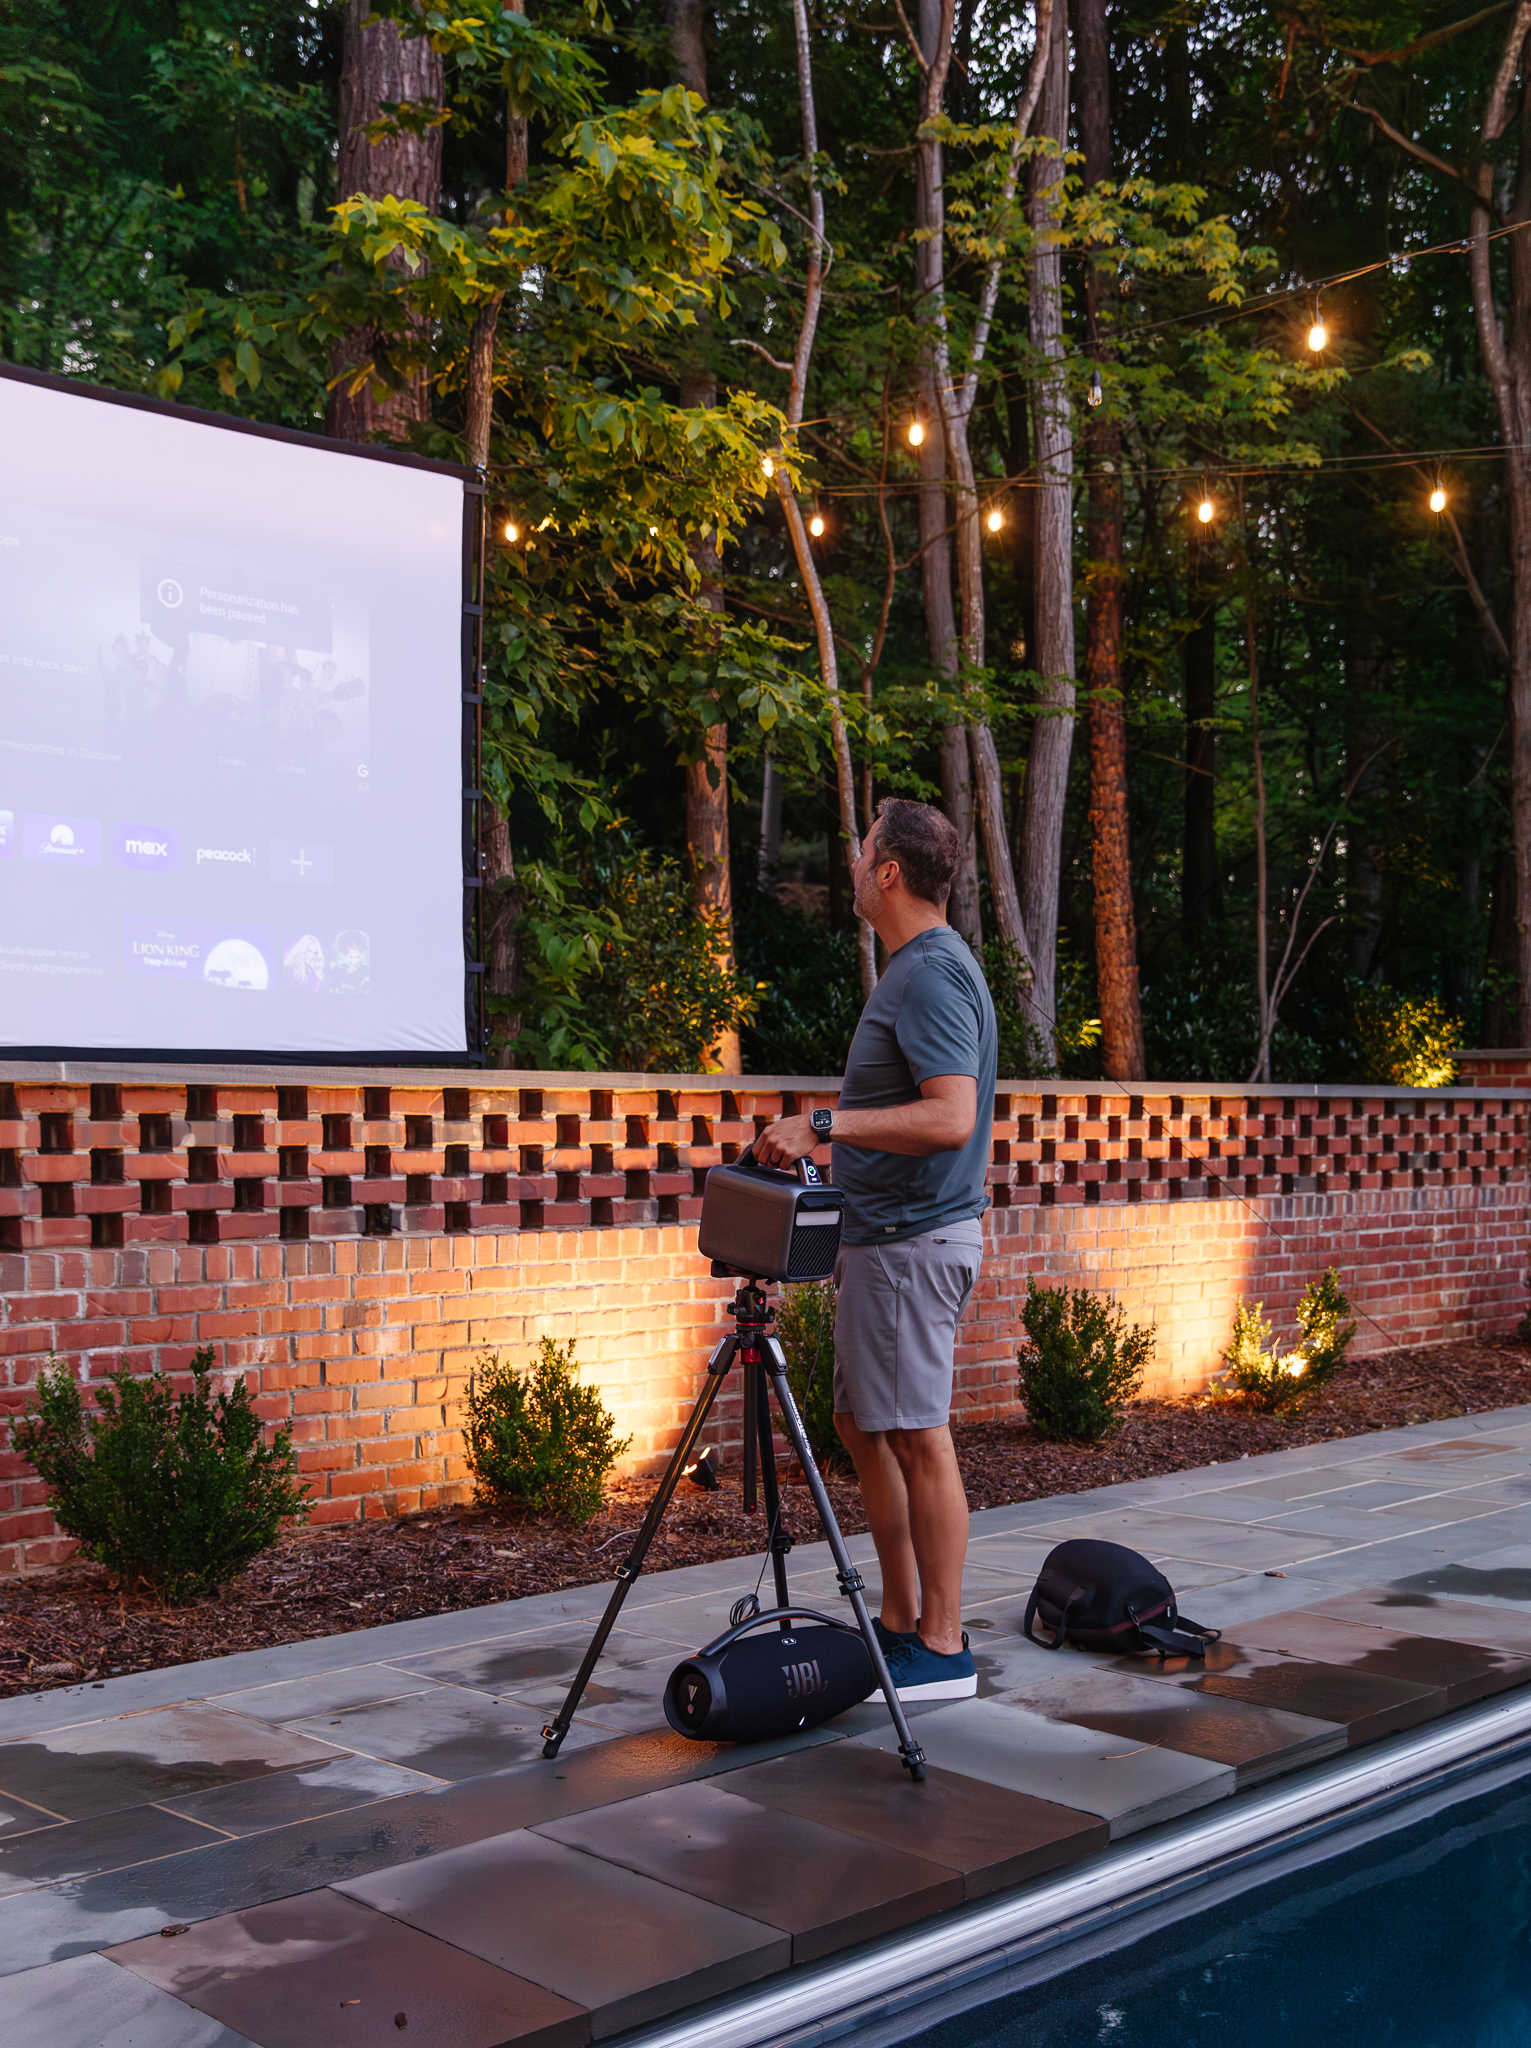 Chris Loves Julia | Chris setting up the projector for an outdoor movie pool party at night